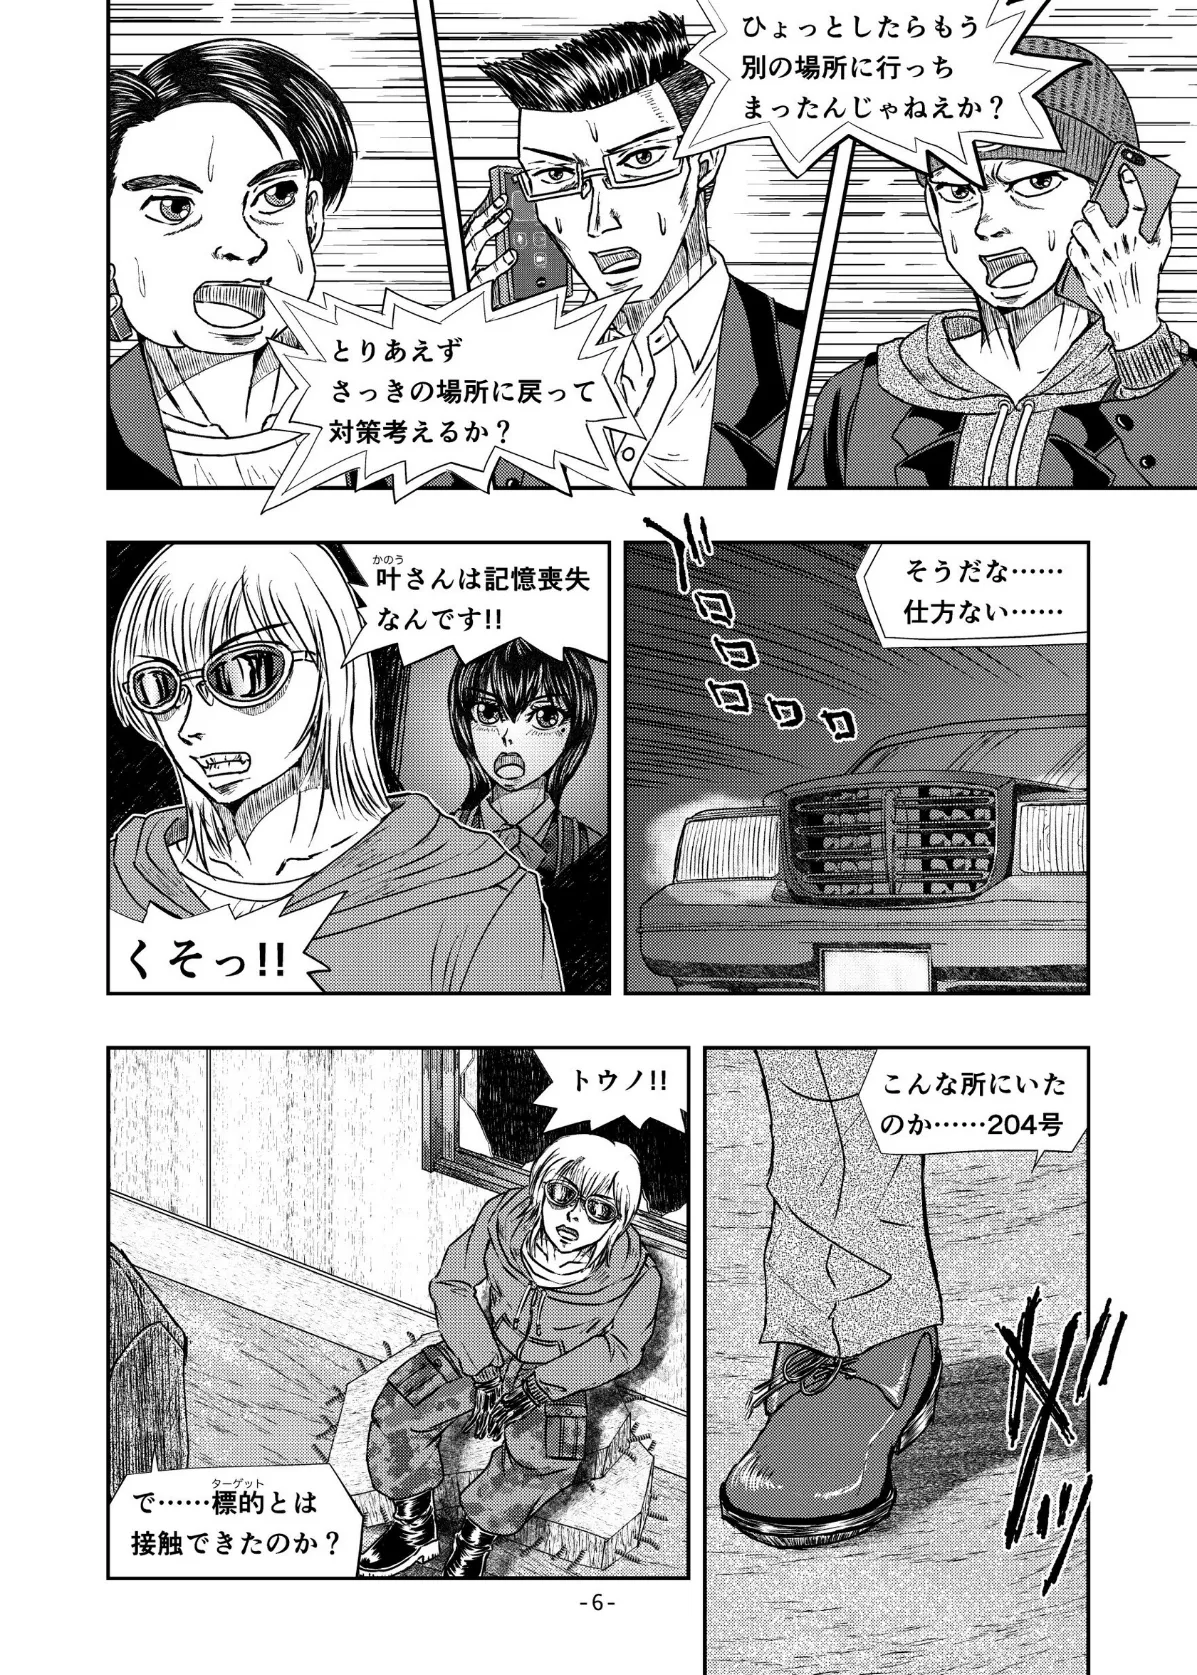 XENON REBOOT＜BASED STORY ON ’BIO DIVER XENON’＞【分冊版】 Chapter1 STRANGERS When We Meet（3） 6ページ